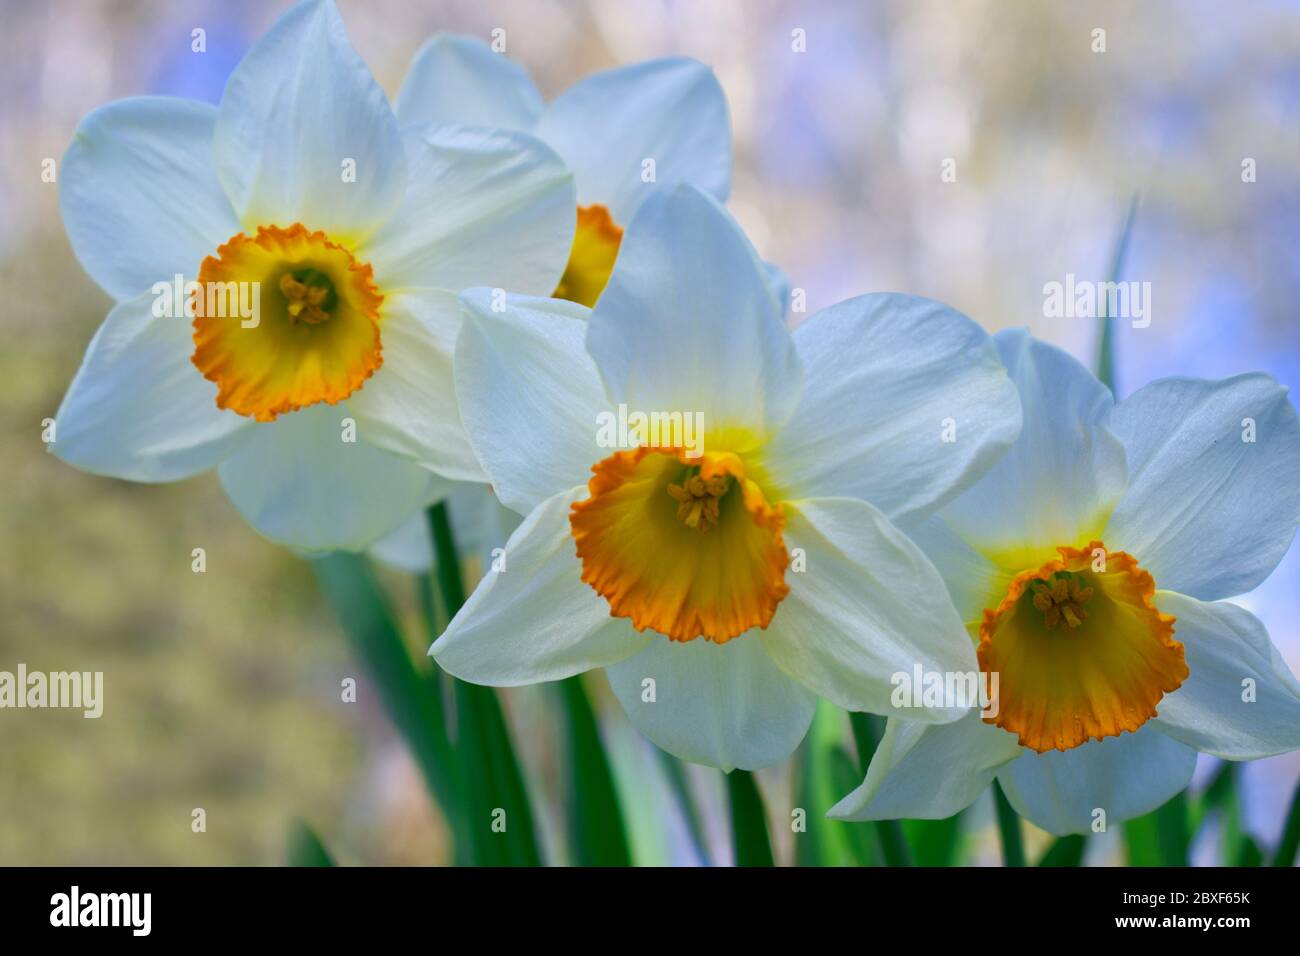 Airy and delicate white narcissus daffodil flower group close up blooming in the spring garden, blurred pastel colours fresh background Stock Photo